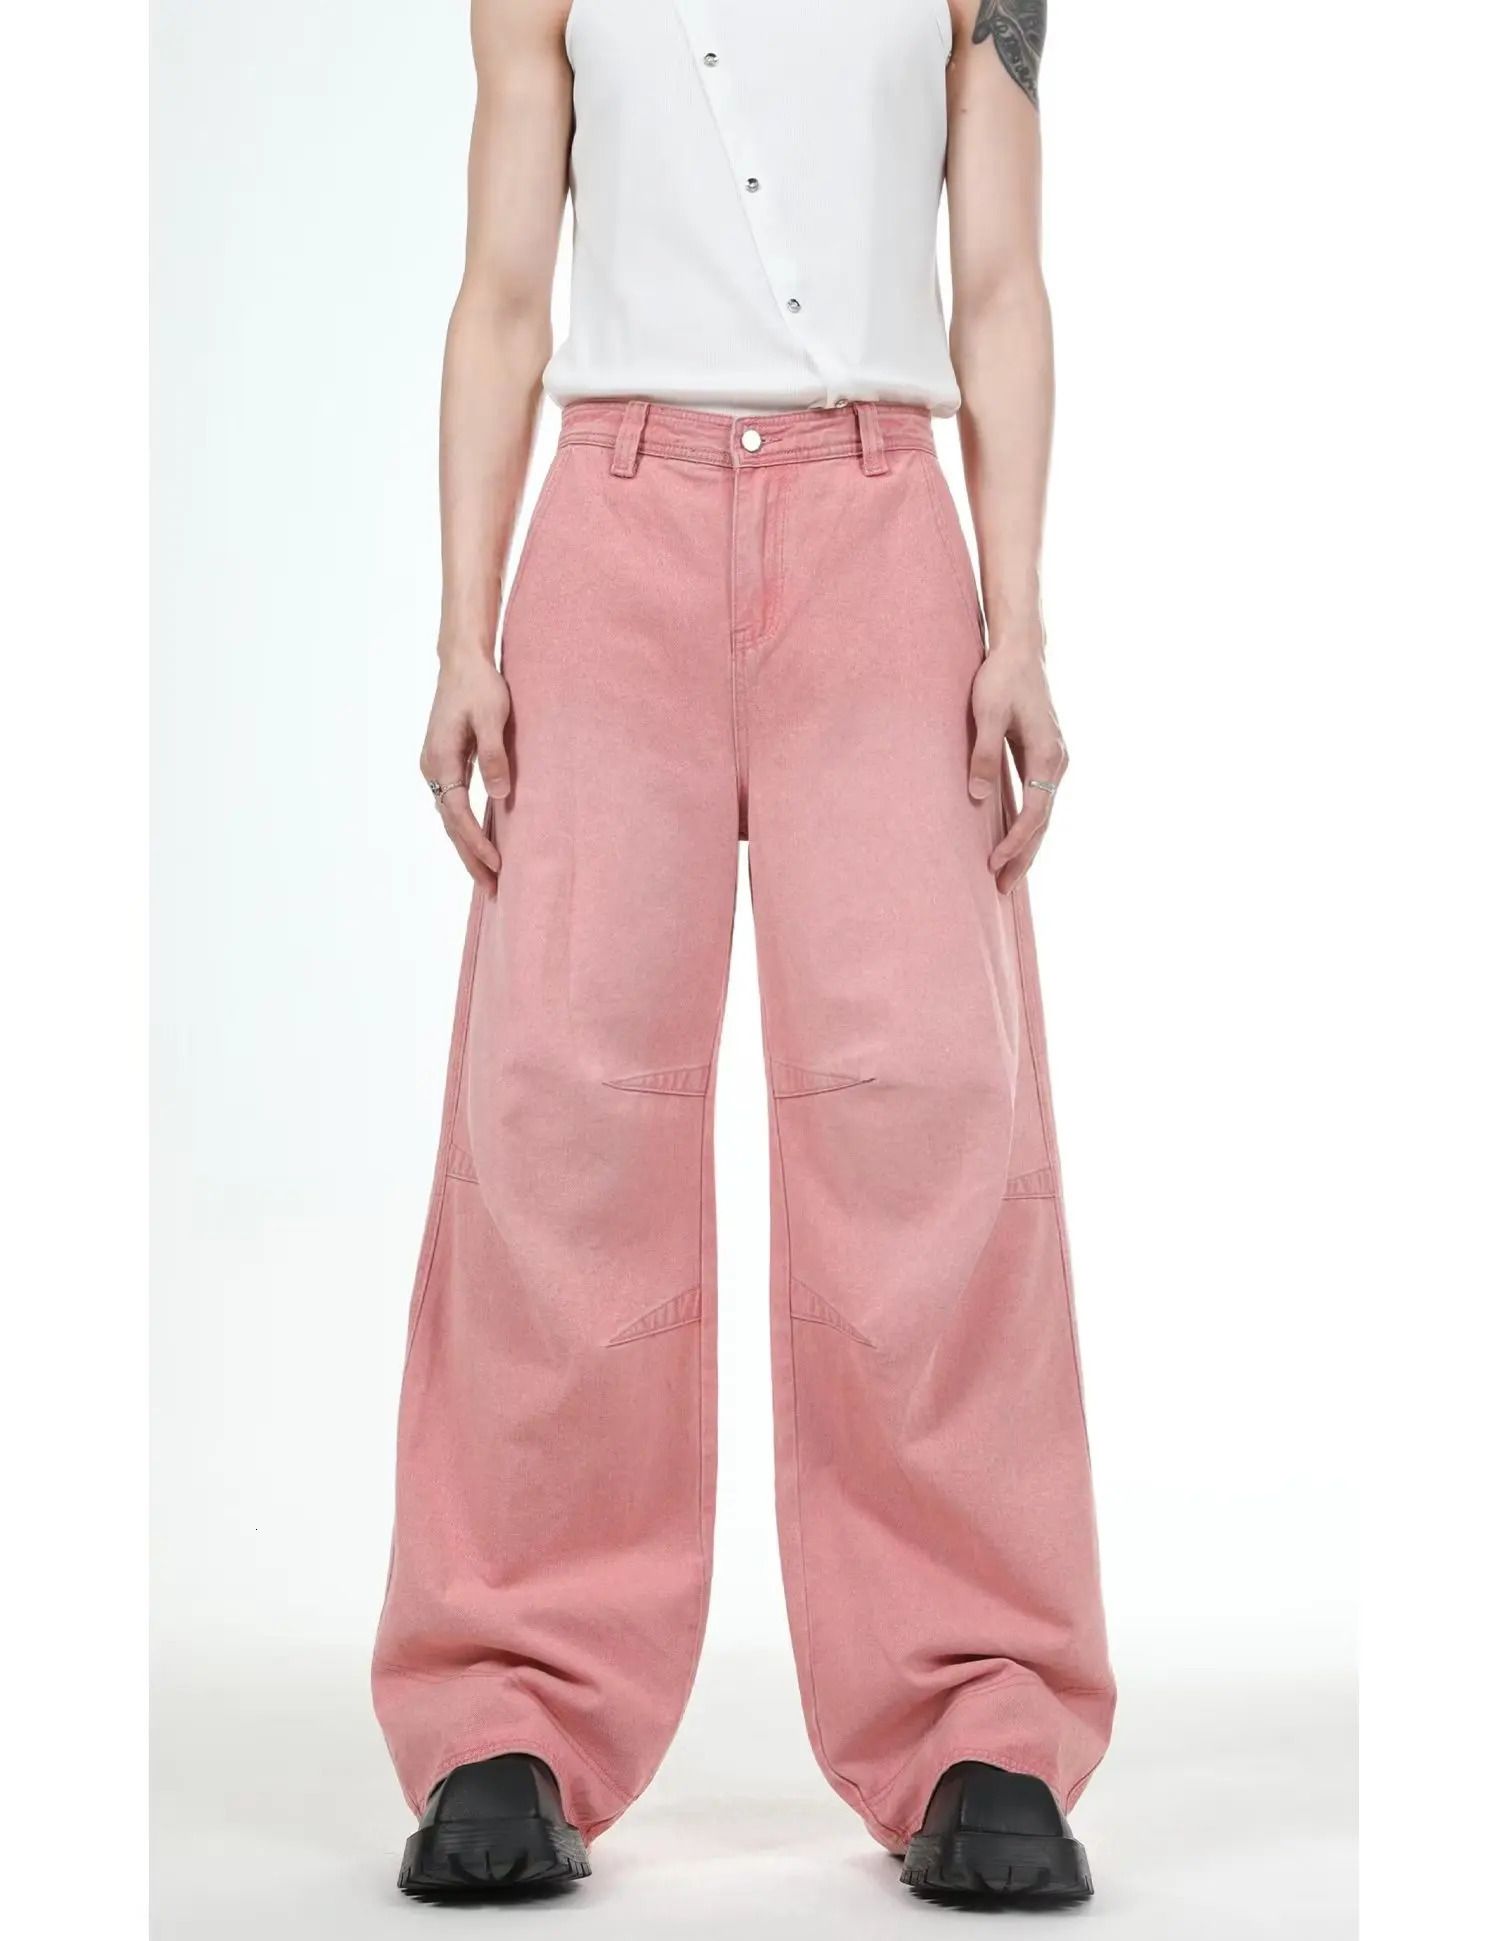 Only Pink Pants